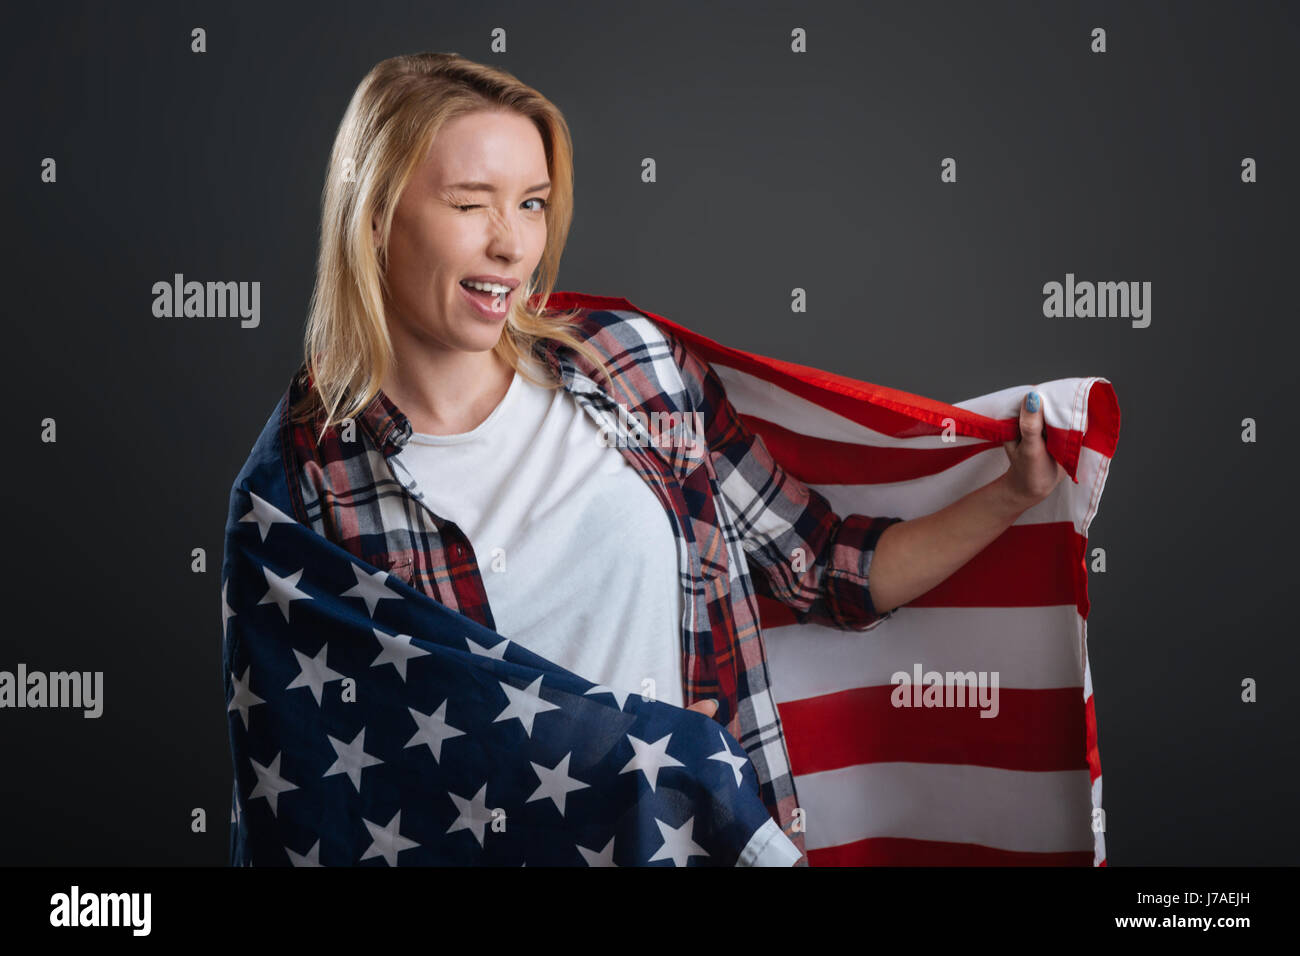 Lovely sweet woman working on patriotic photoshoot Stock Photo